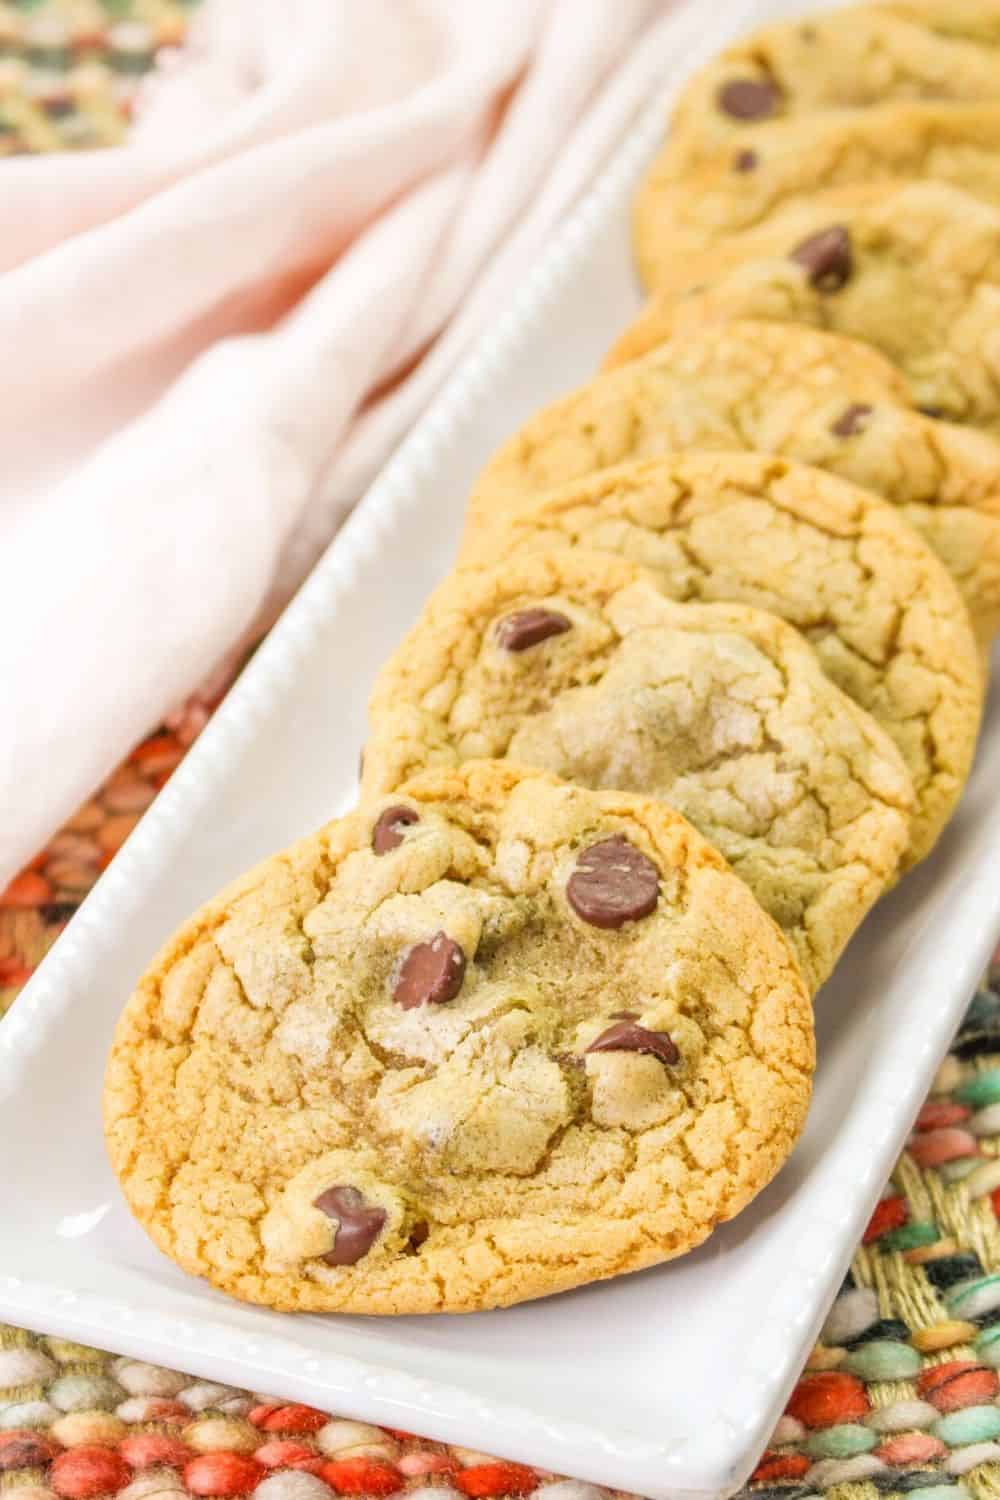 several chocolate chip cookies made with vegetable oil are served on a white platter